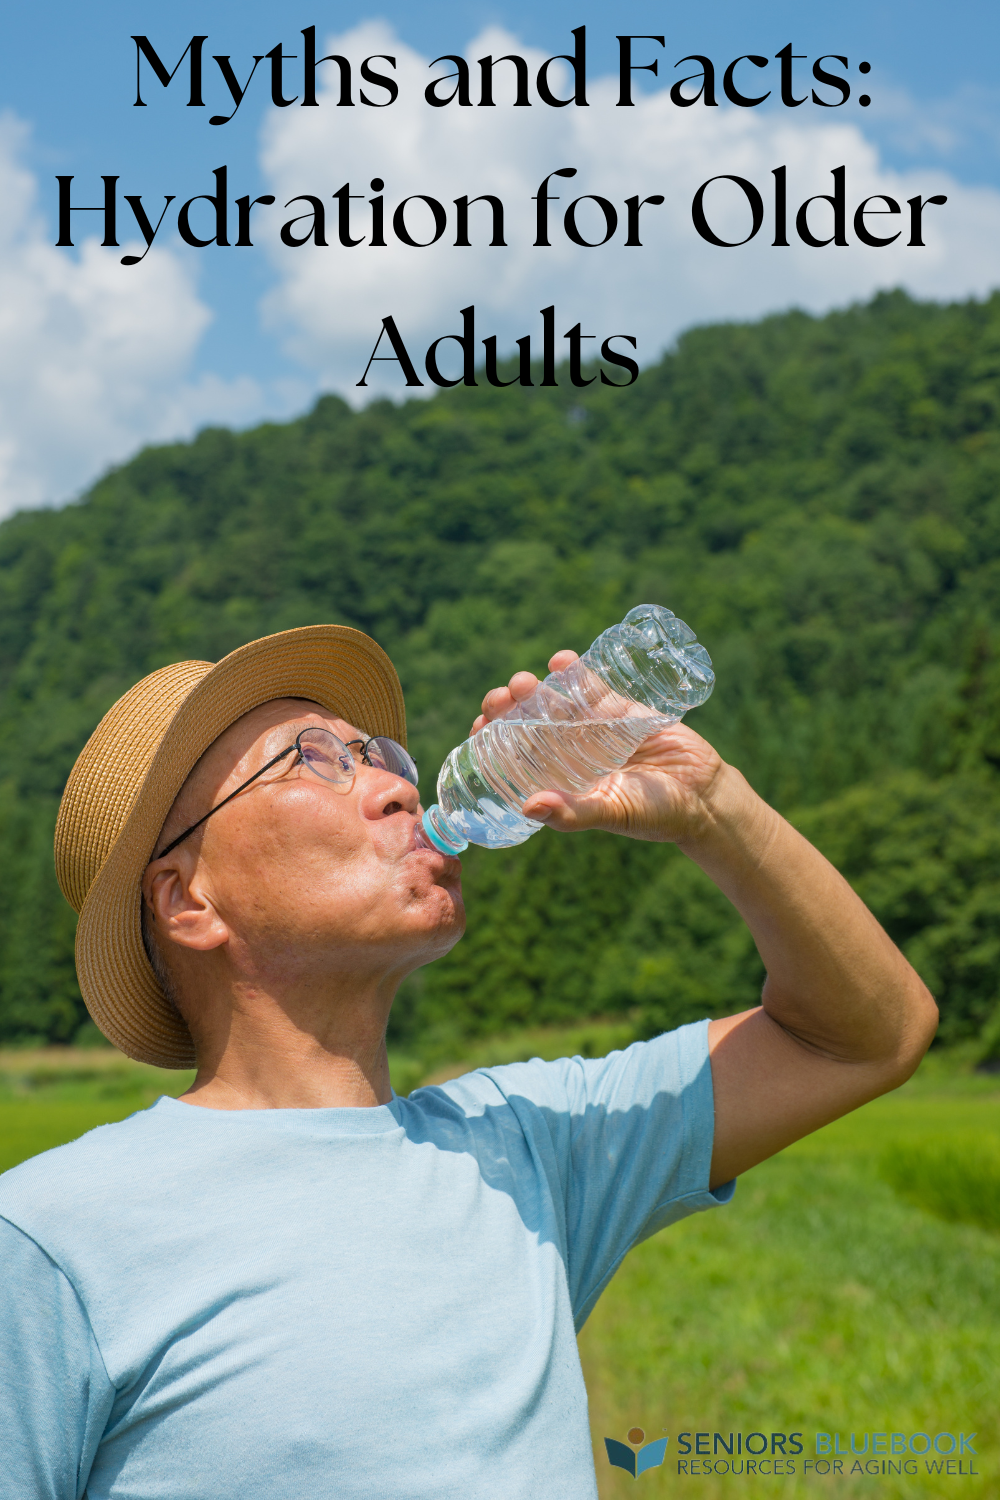 Misconceptions may lead to dehydration in older adults